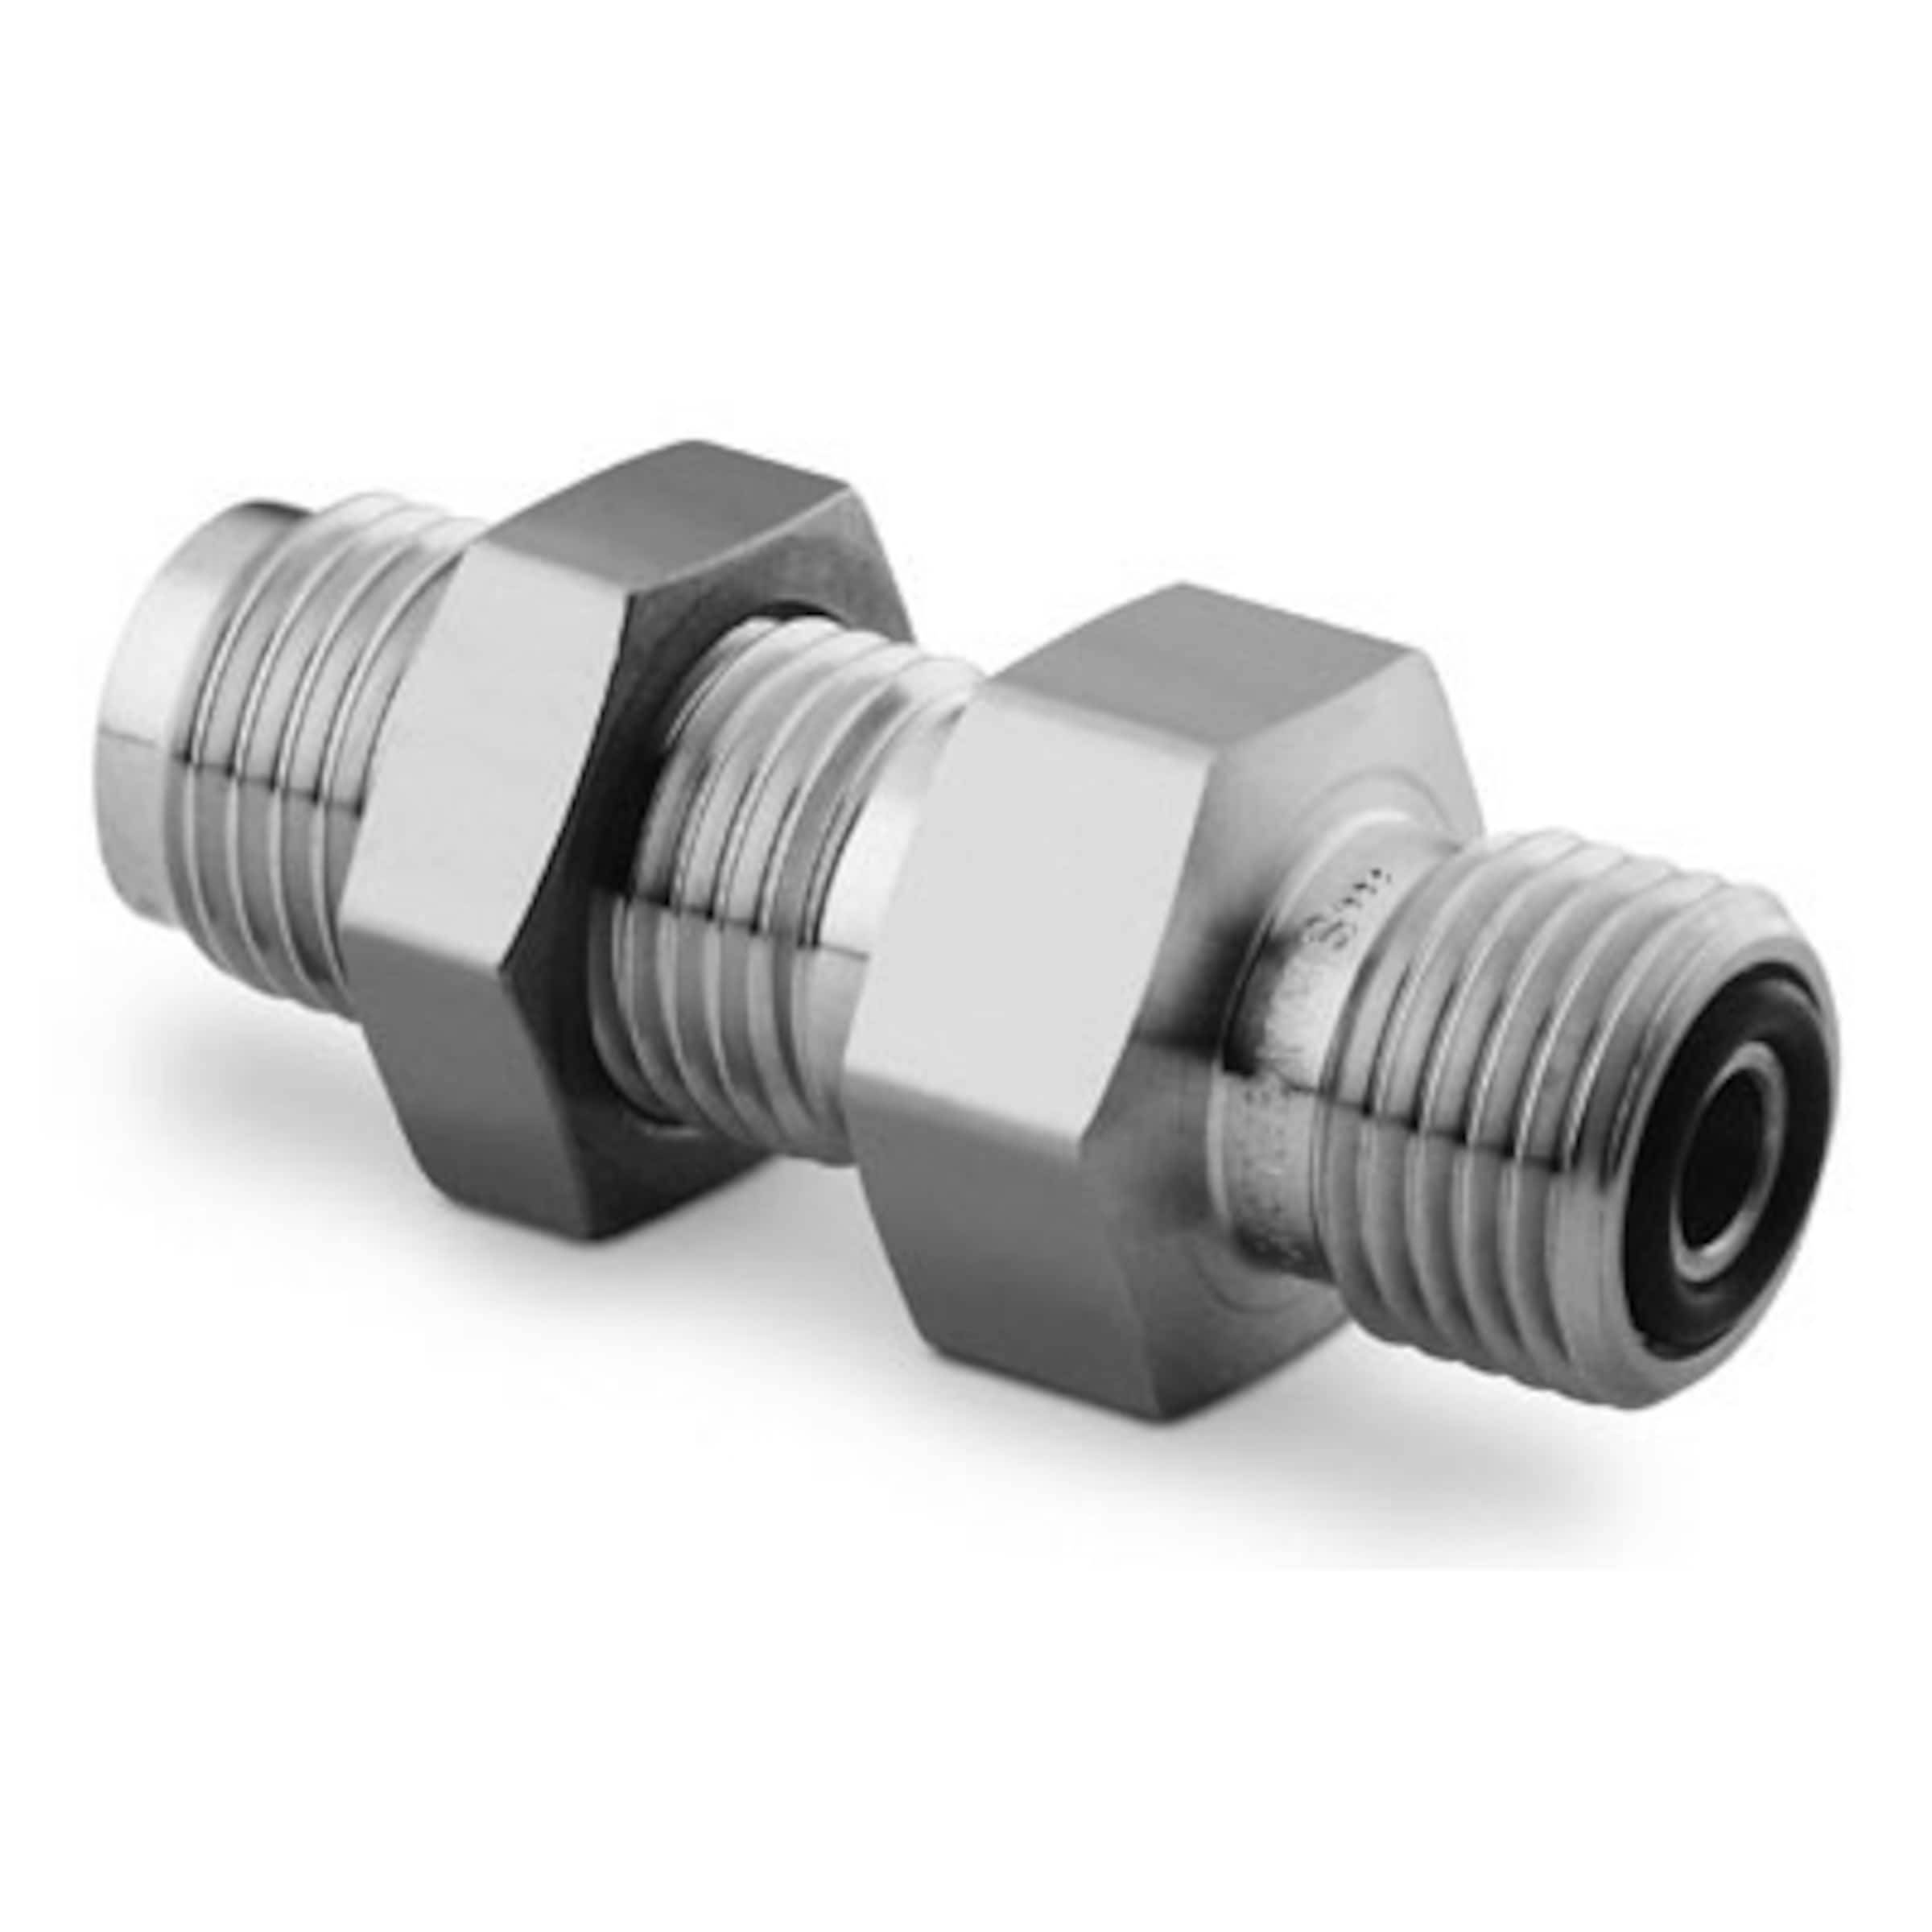 Straights, Bulkheads, VCO® O-Ring Face Seal Fittings